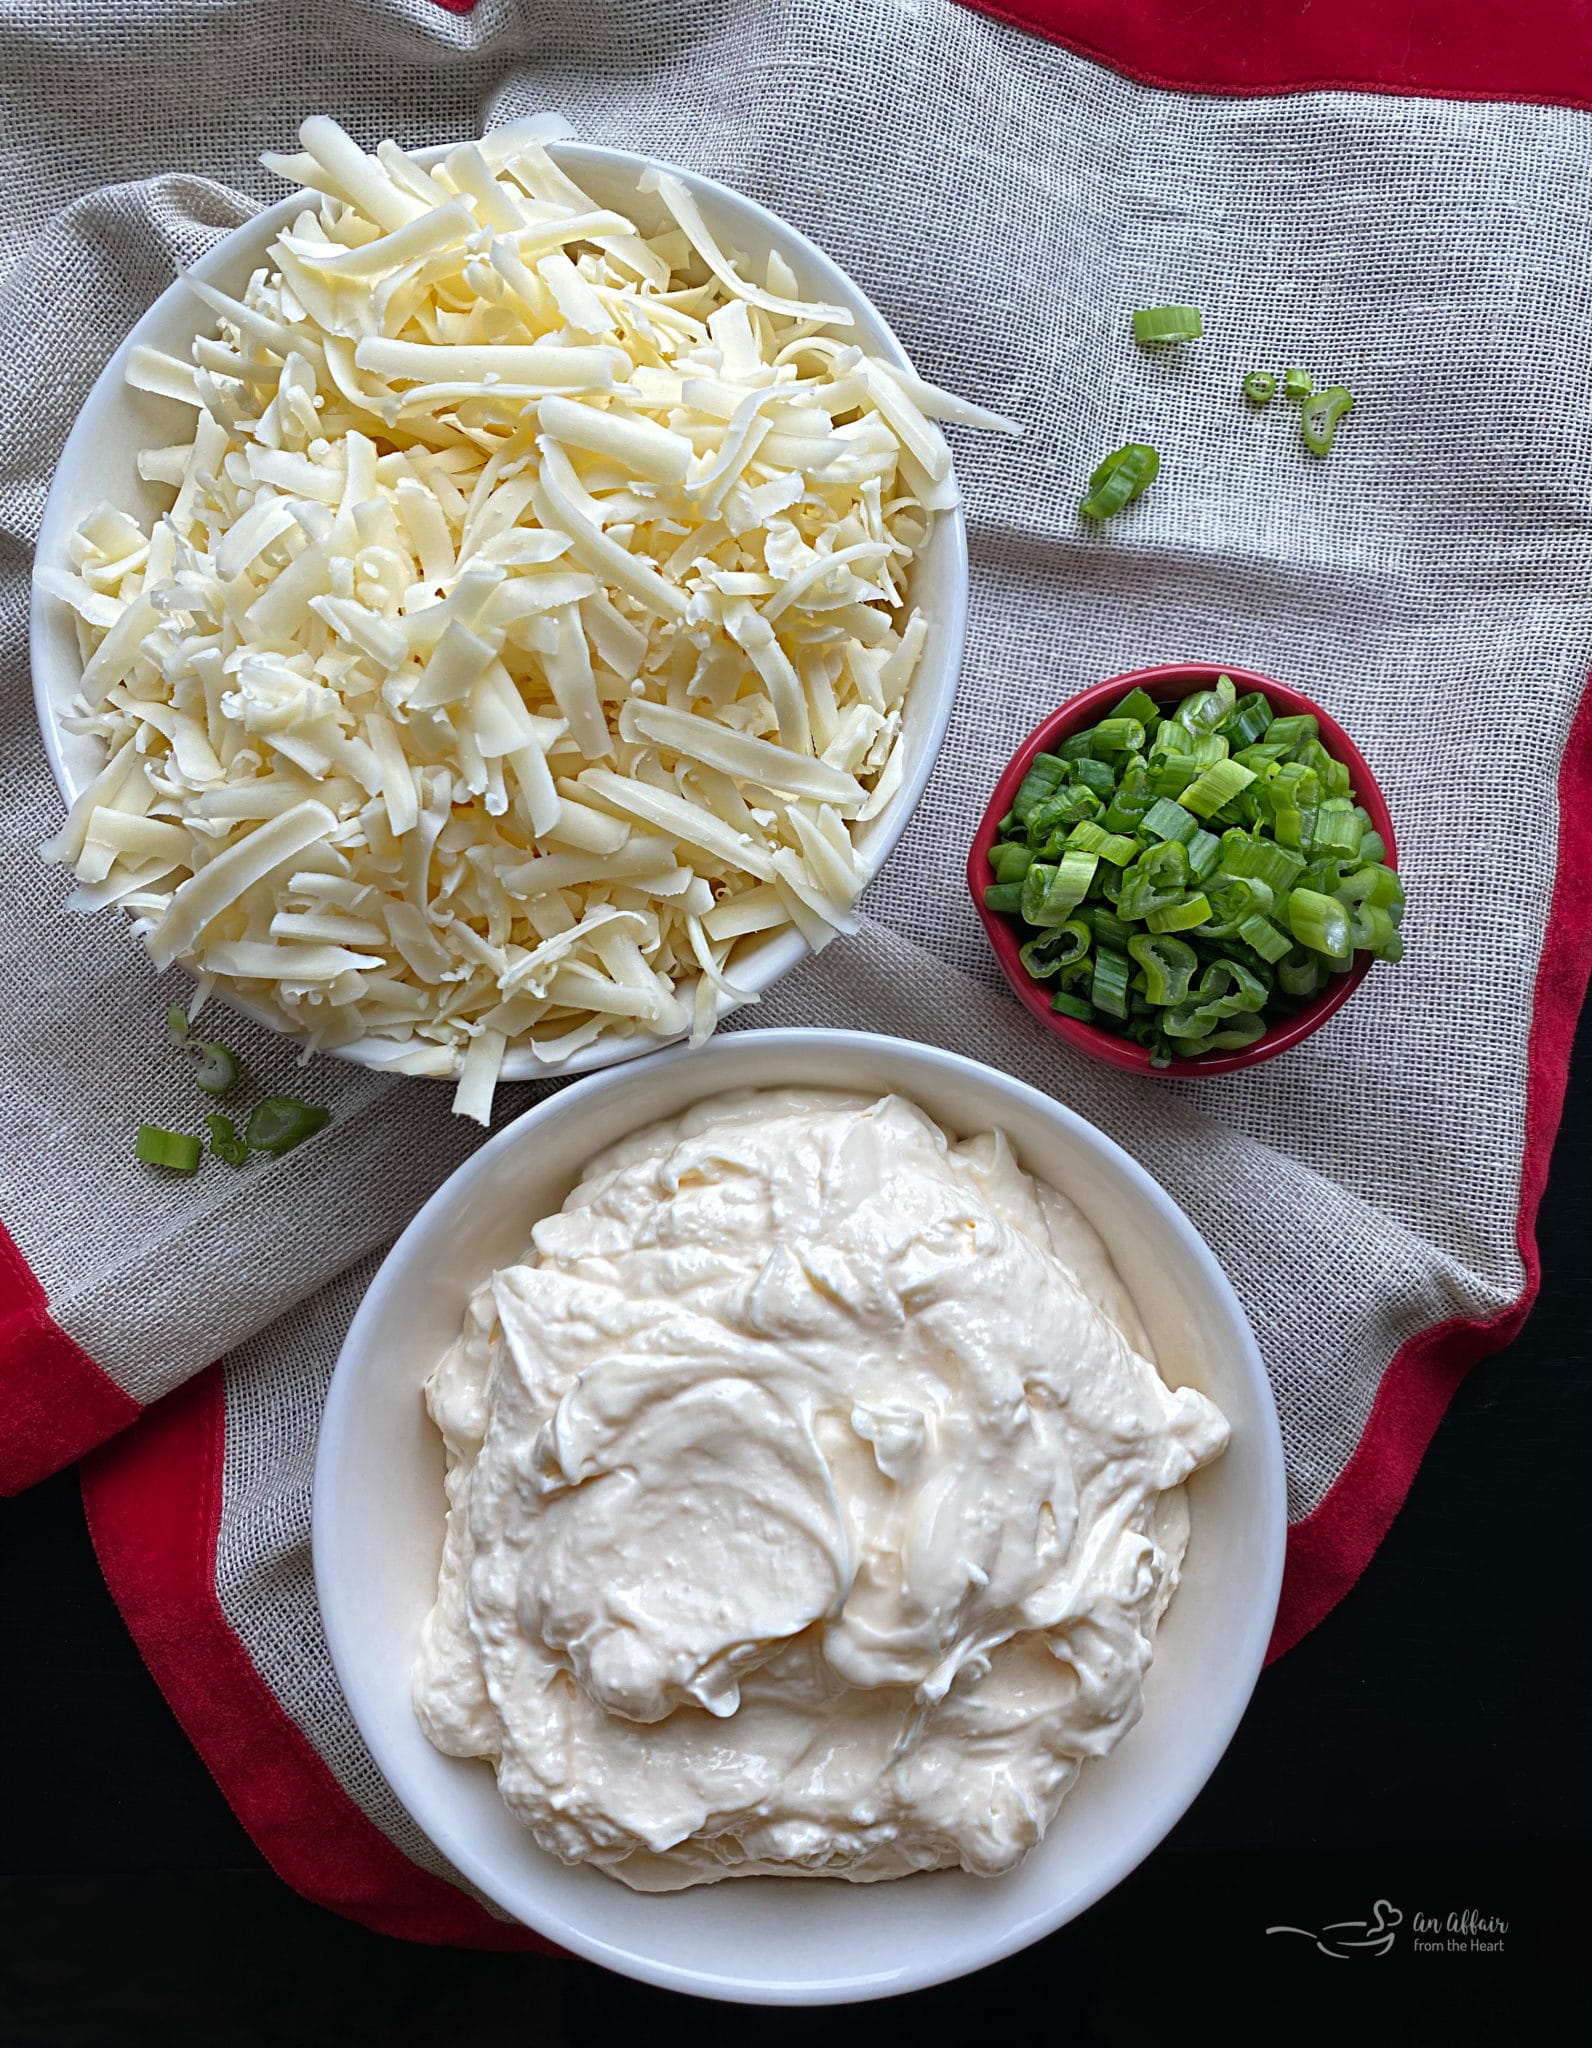 Three Ingredient Swiss Cheese Dip for Veggies, Crackers or Chips